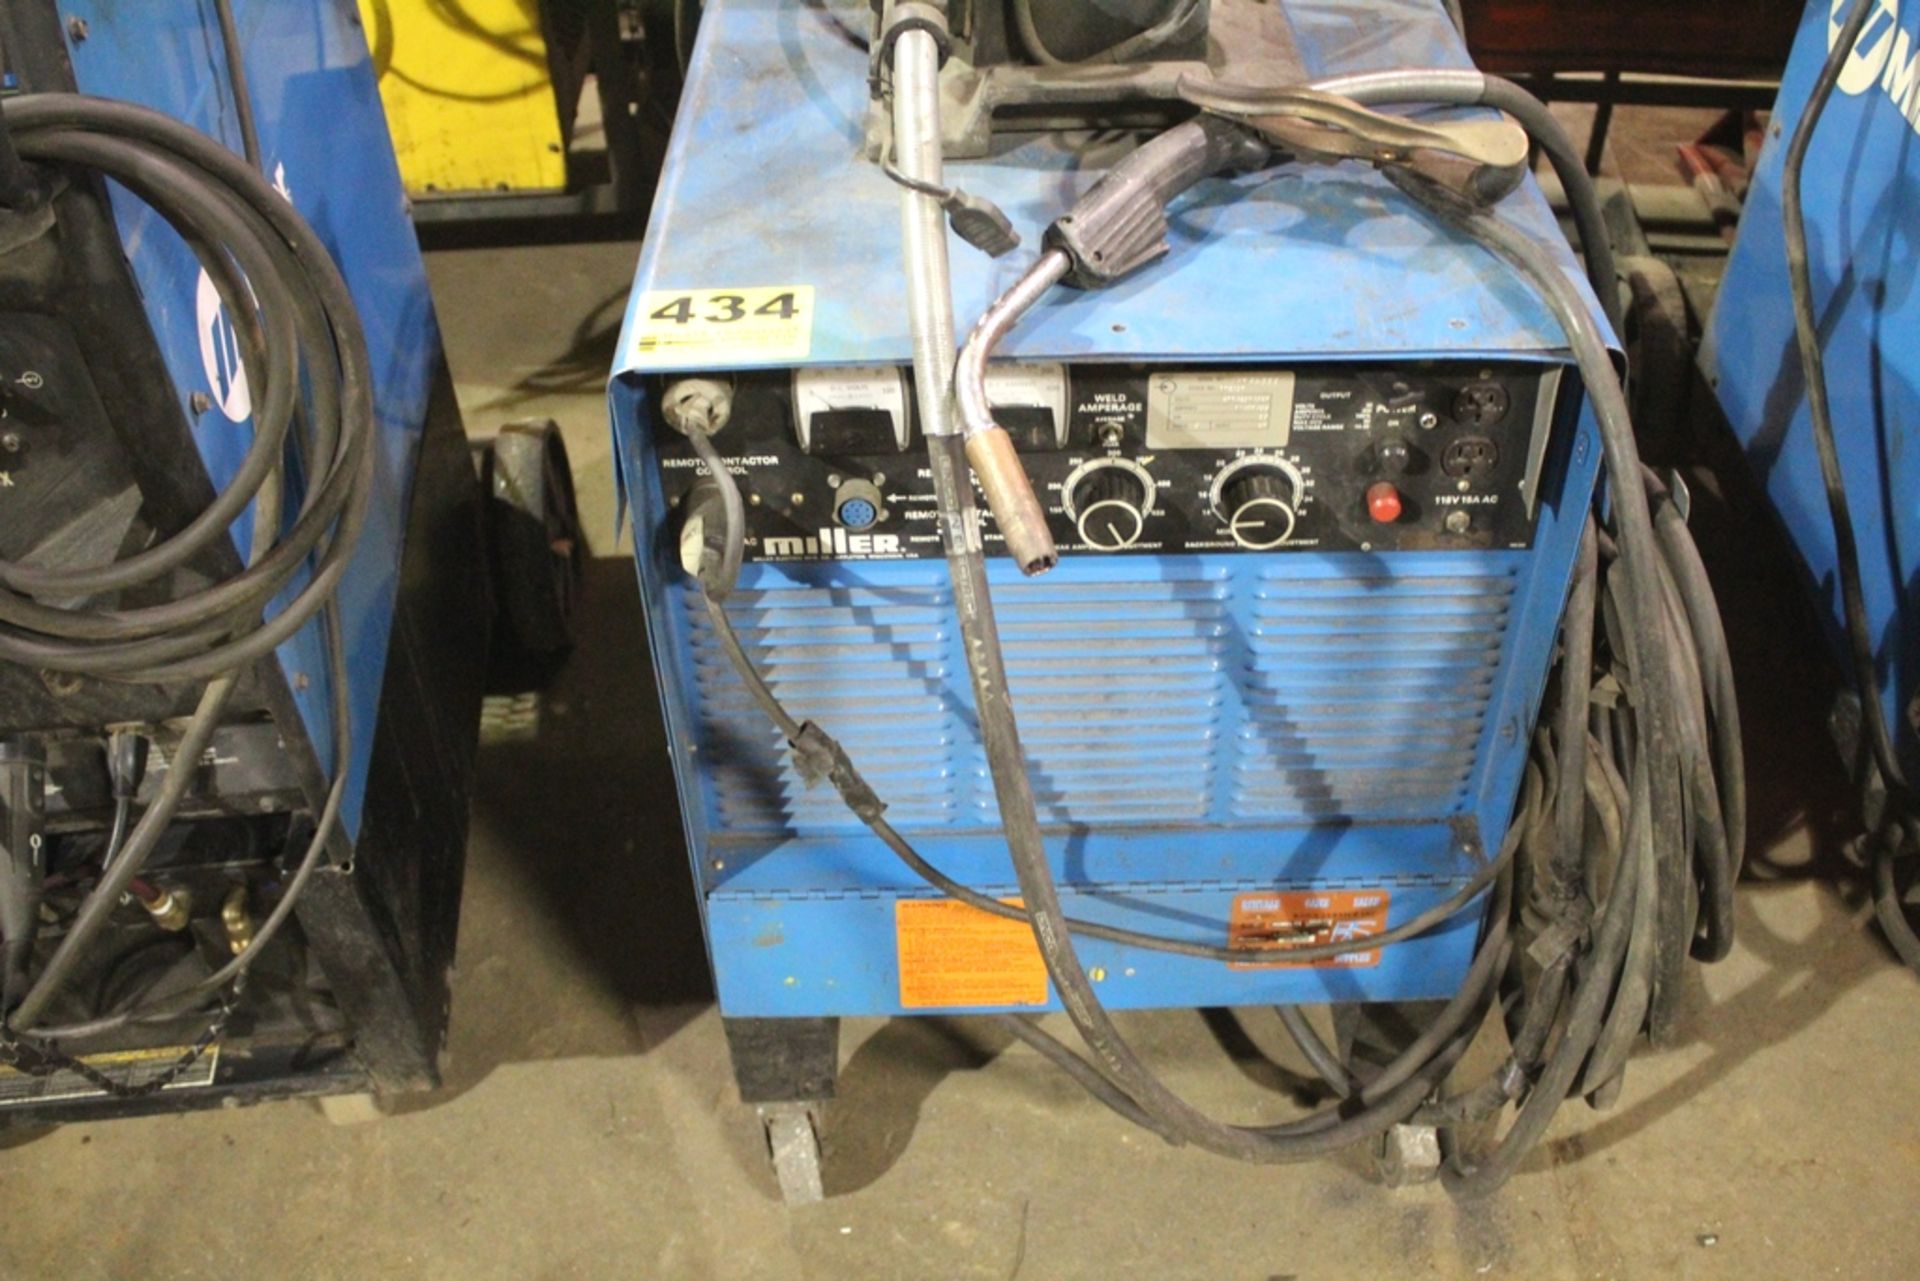 MILLER MODEL PULSTAR 450 CONSTANT VOLTAGE PULSED DC ARC WELDING POWER SOURCE, S/N JH174533, WITH - Image 2 of 4